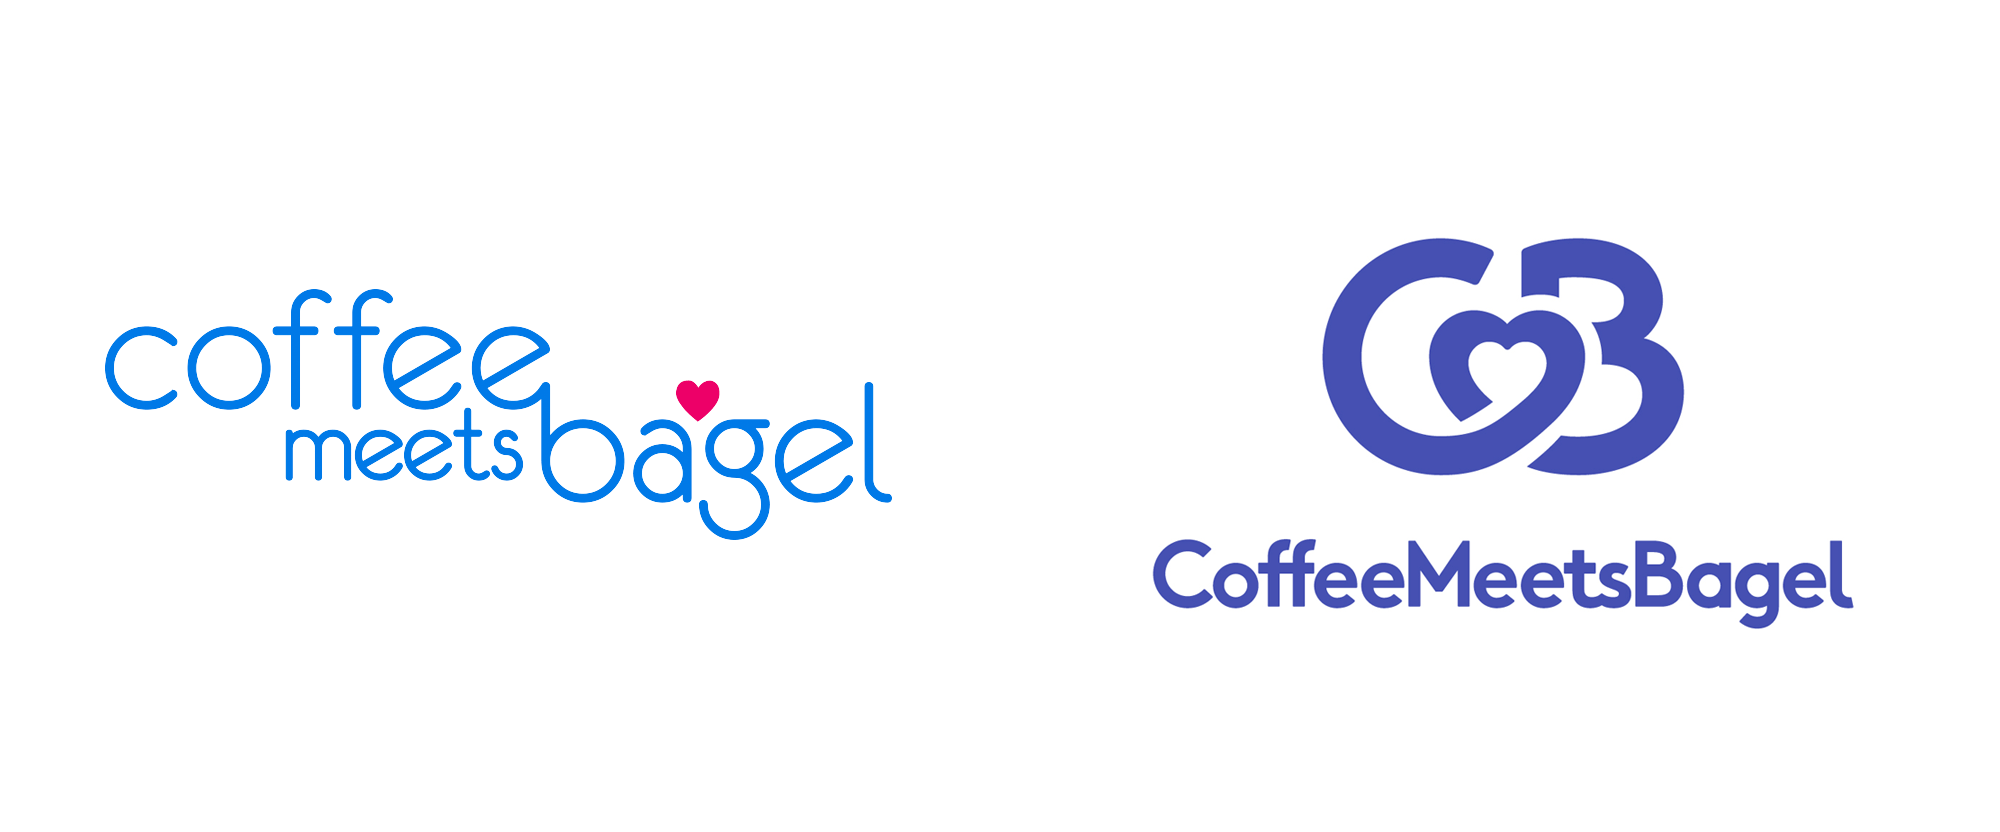 Coffee Meets Bagel Logo - Brand New: New Logo and Identity for Coffee Meets Bagel by Lobster Phone